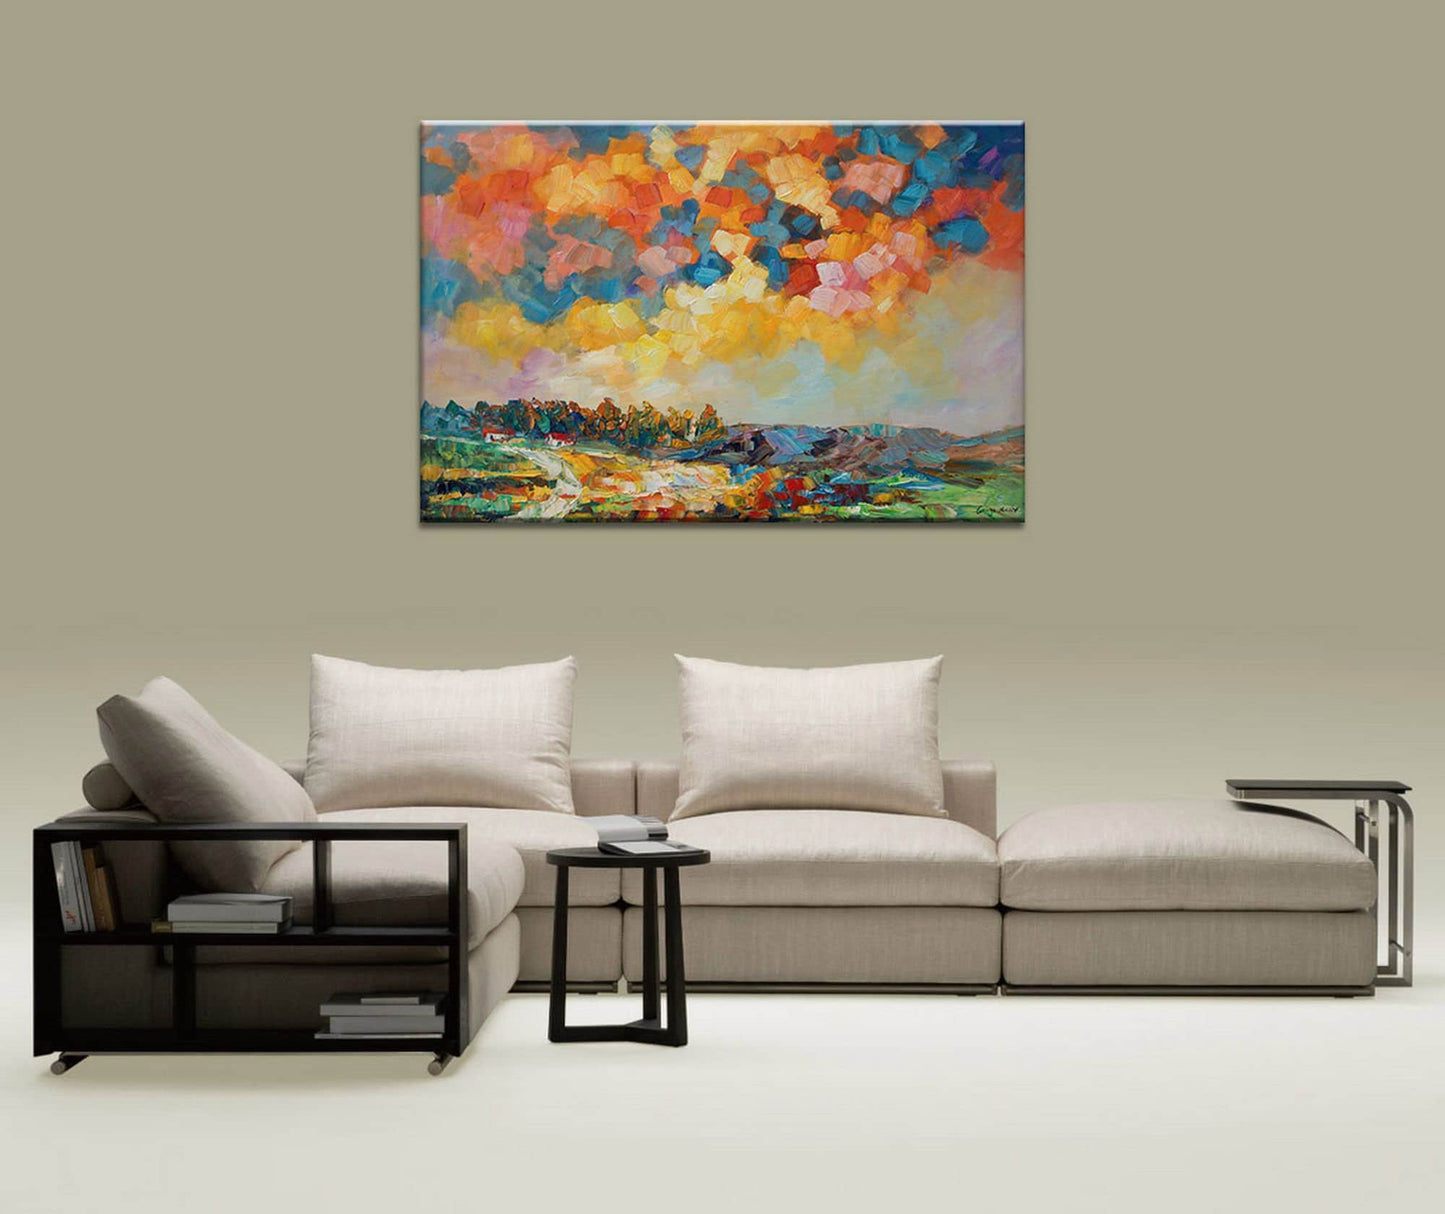 Bring Tuscany Home with this Stunning Landscape Oil Painting on Your Kitchen Wall - Original Artwork - Tuscany - Kitchen Wall Decor